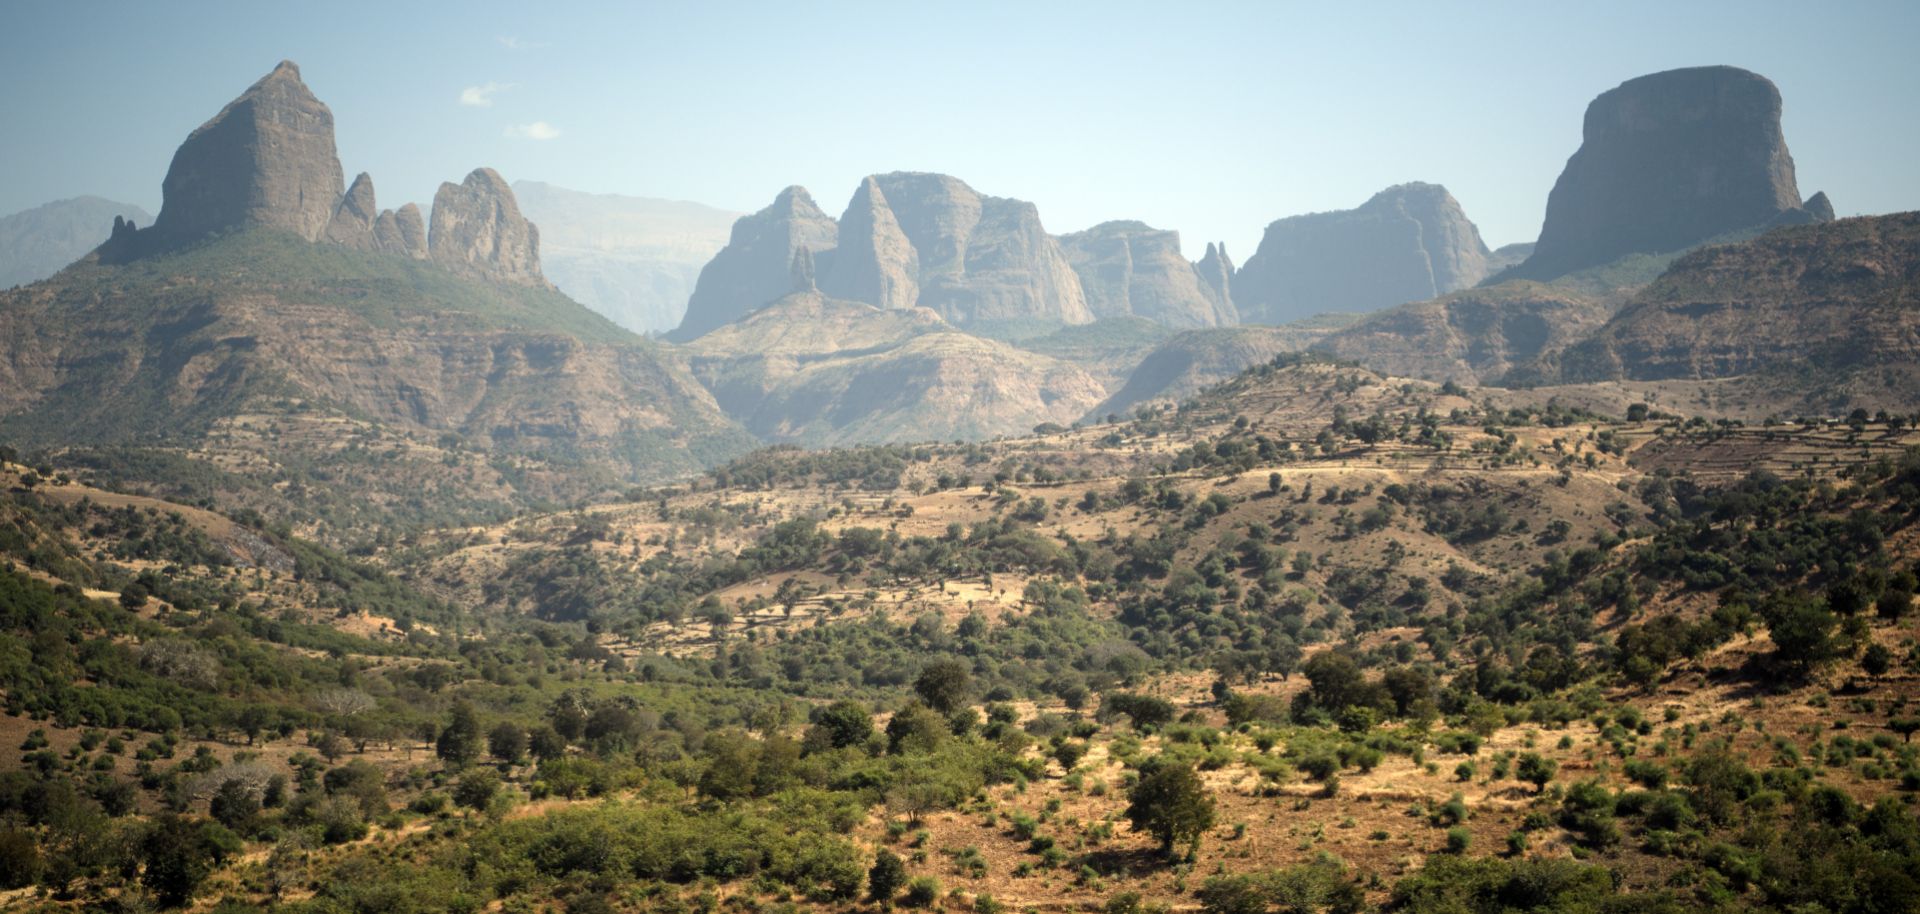 The peaks of the Simien Mountains tower over the landscape of Gondar, Ethiopia. Ethiopia's new prime minister, Abiy Ahmed, is building on his country's historical and geopolitical advantages to bring it back to prominence in, and perhaps beyond, the surrounding region.